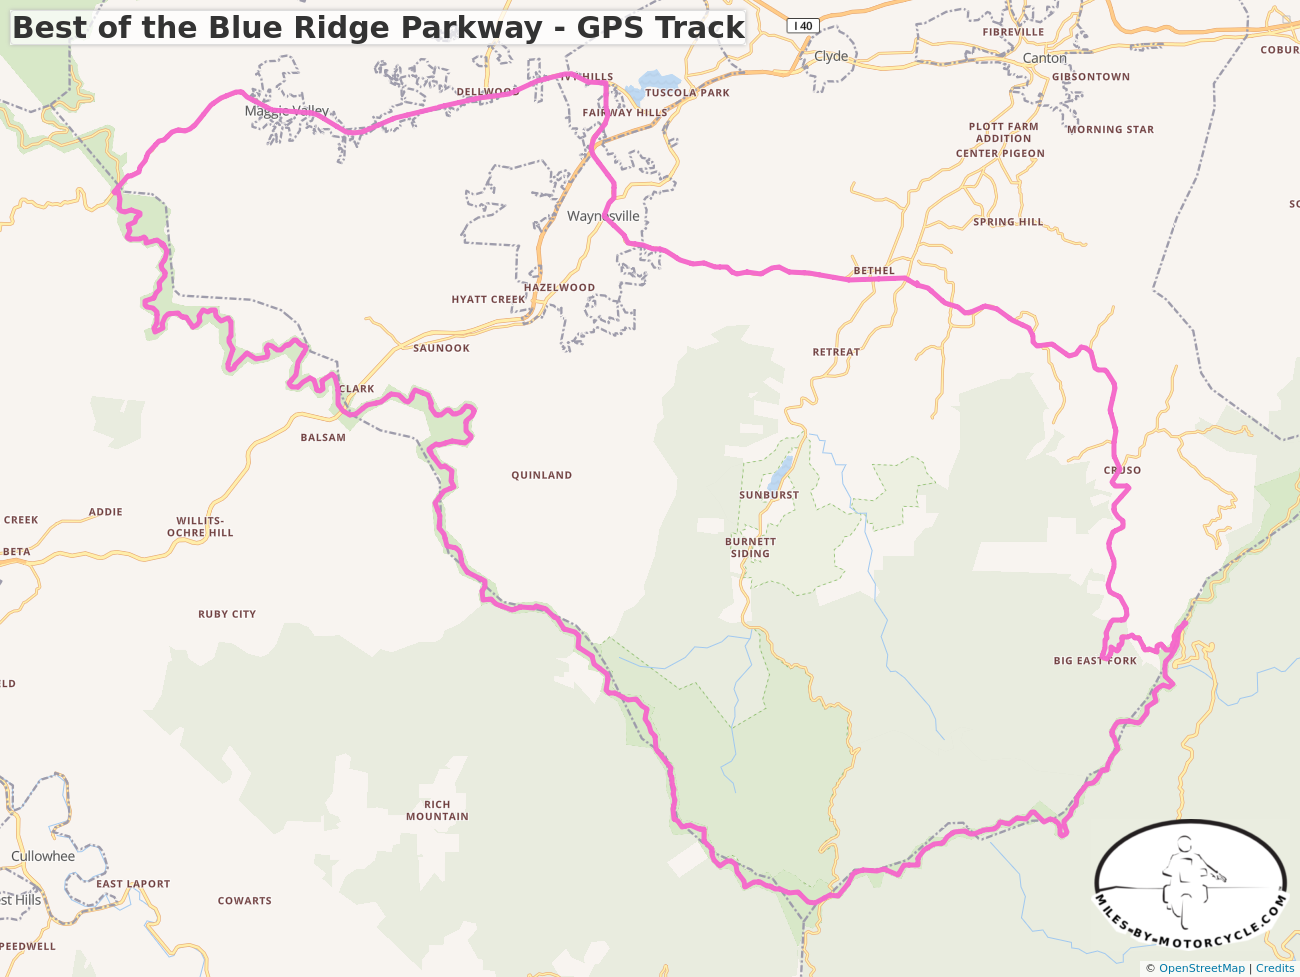 Best of the Blue Ridge Parkway - GPS Track